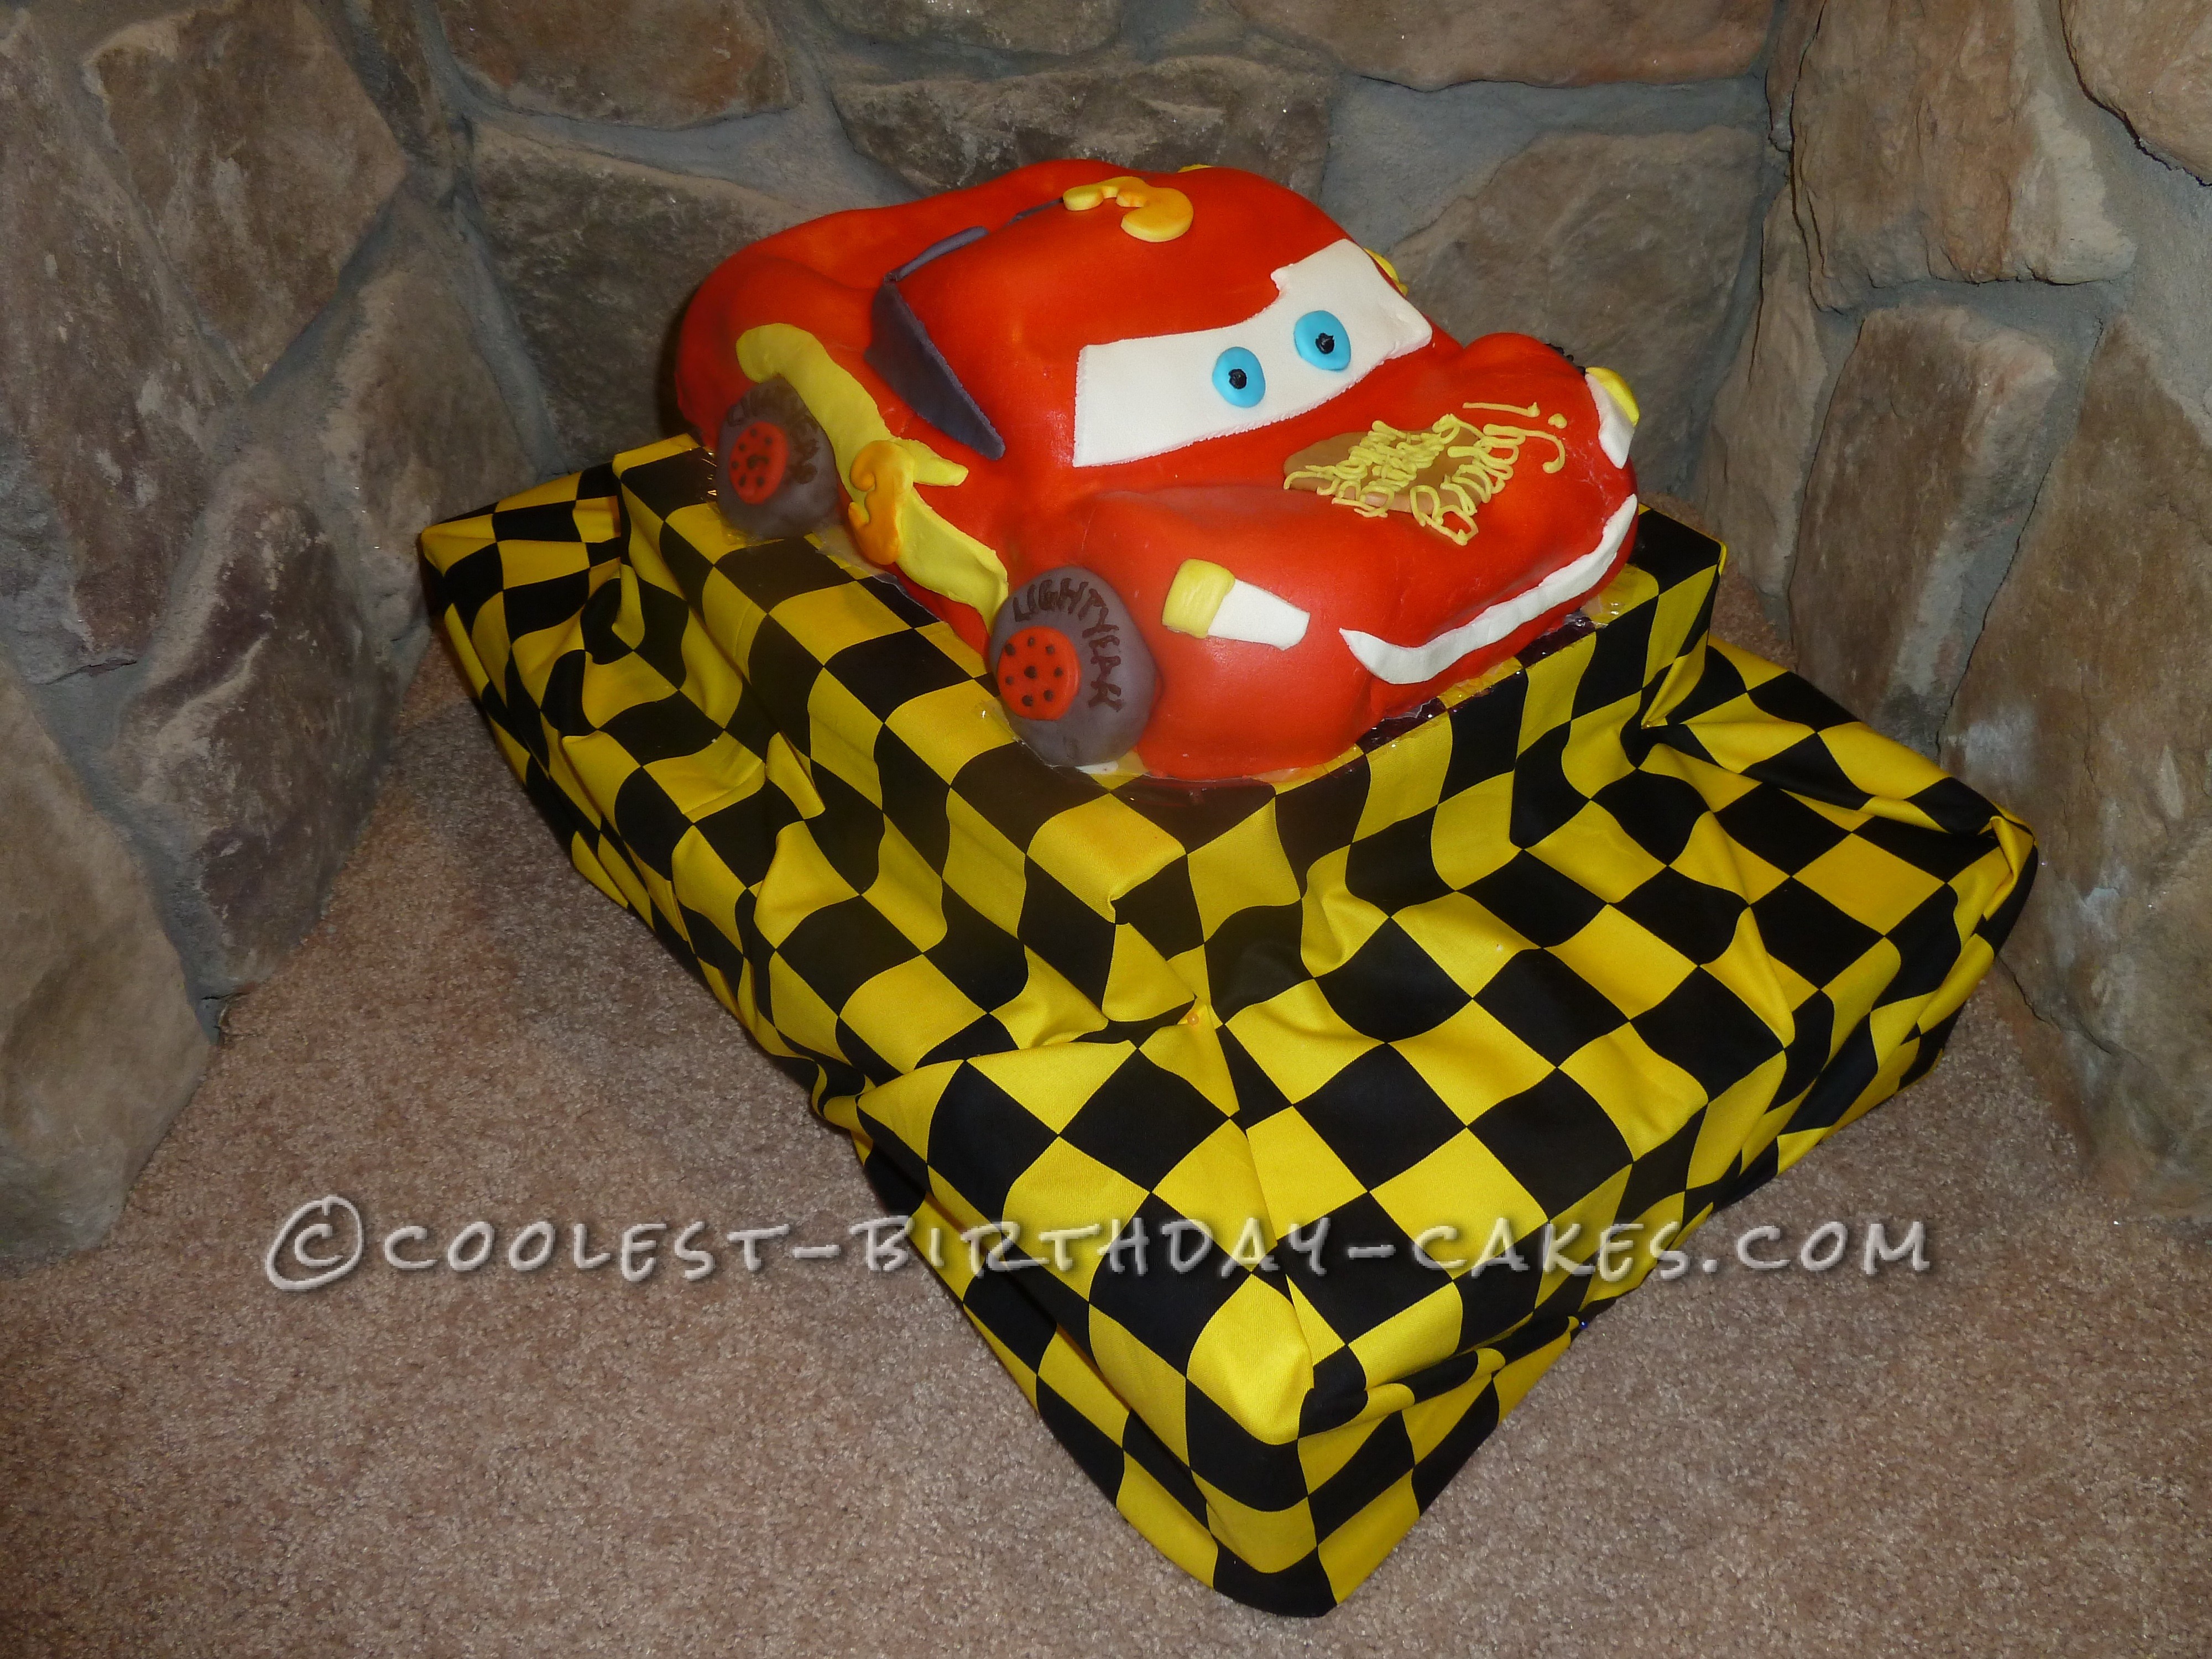 Coolest Lightning McQueen Cake: Drives Faster Than It Was Made!